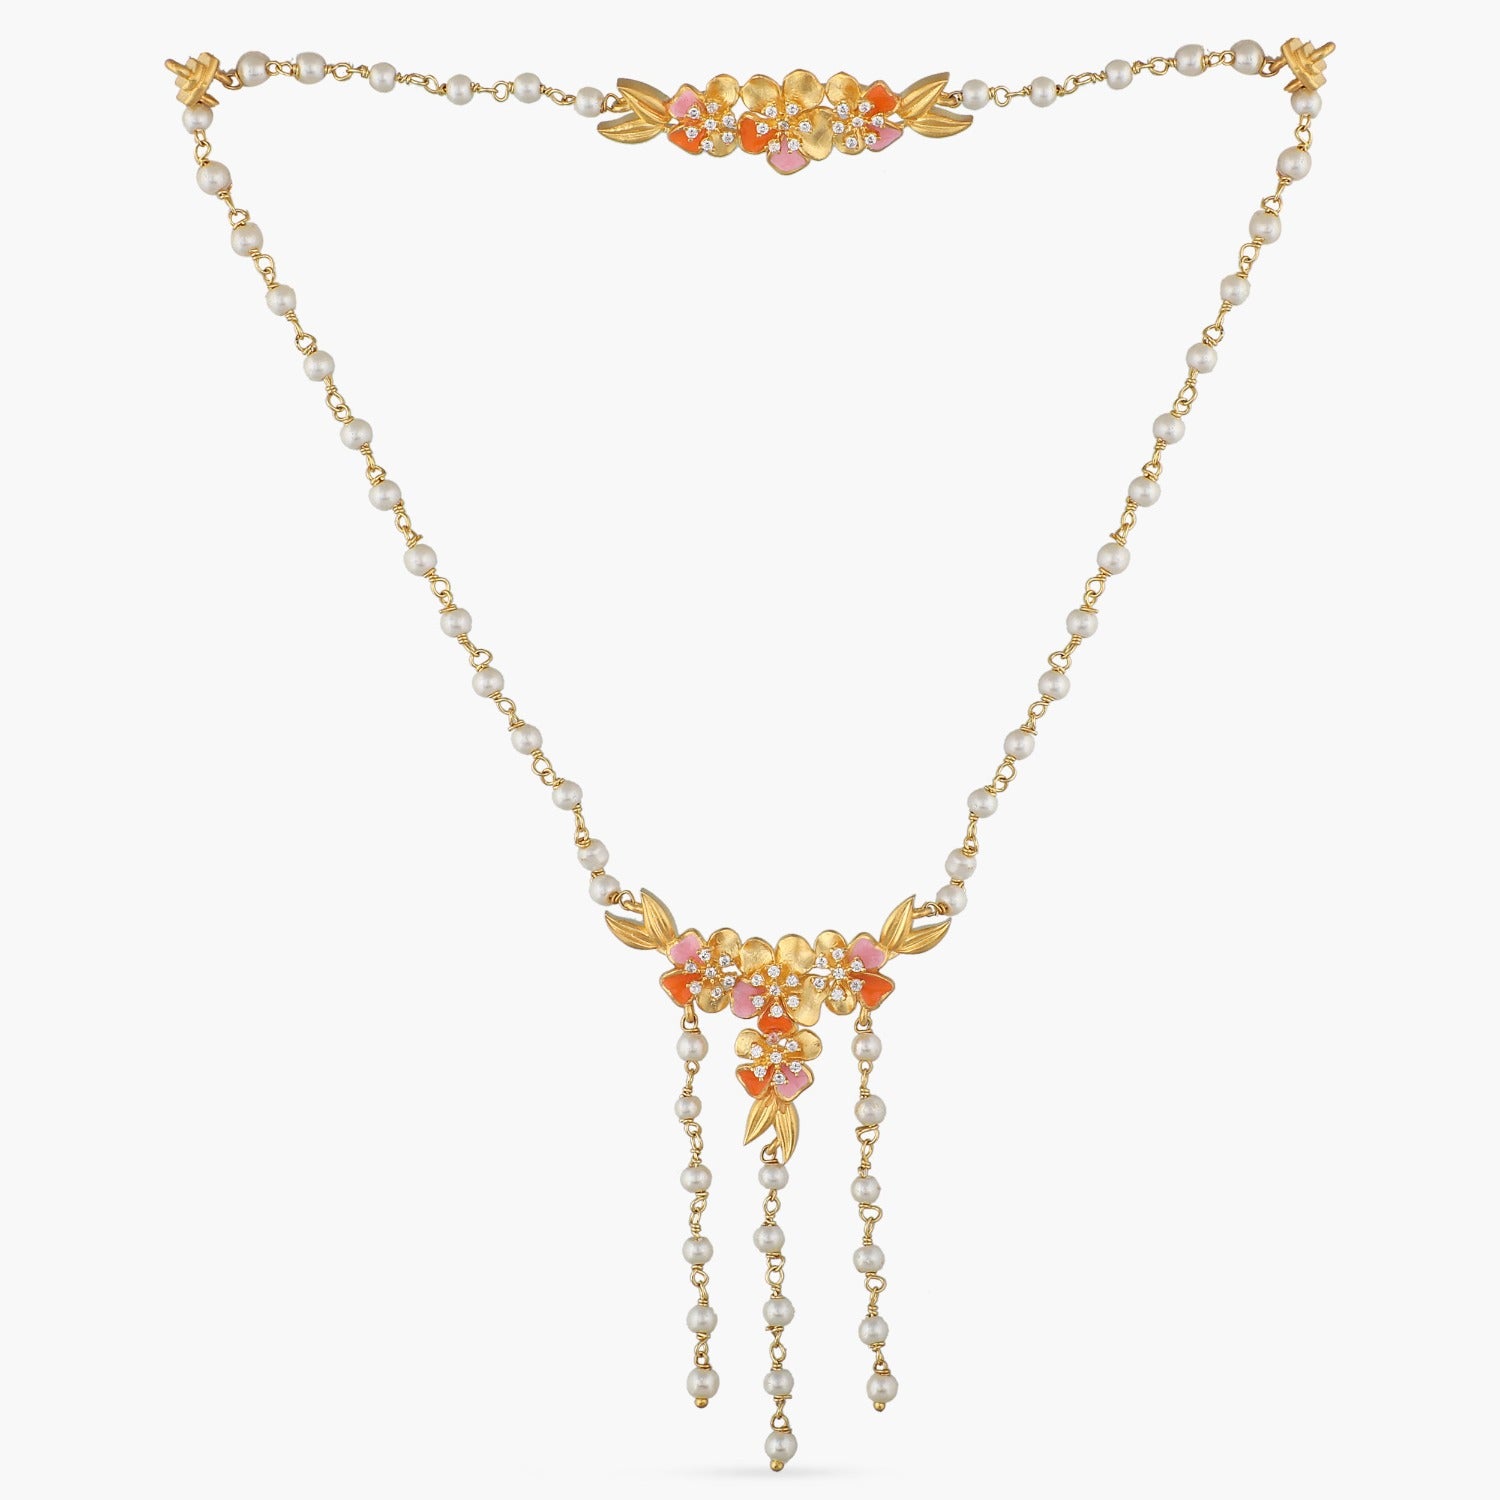 Neck Chains Archives - Buy Best Ethnic and Contemporary